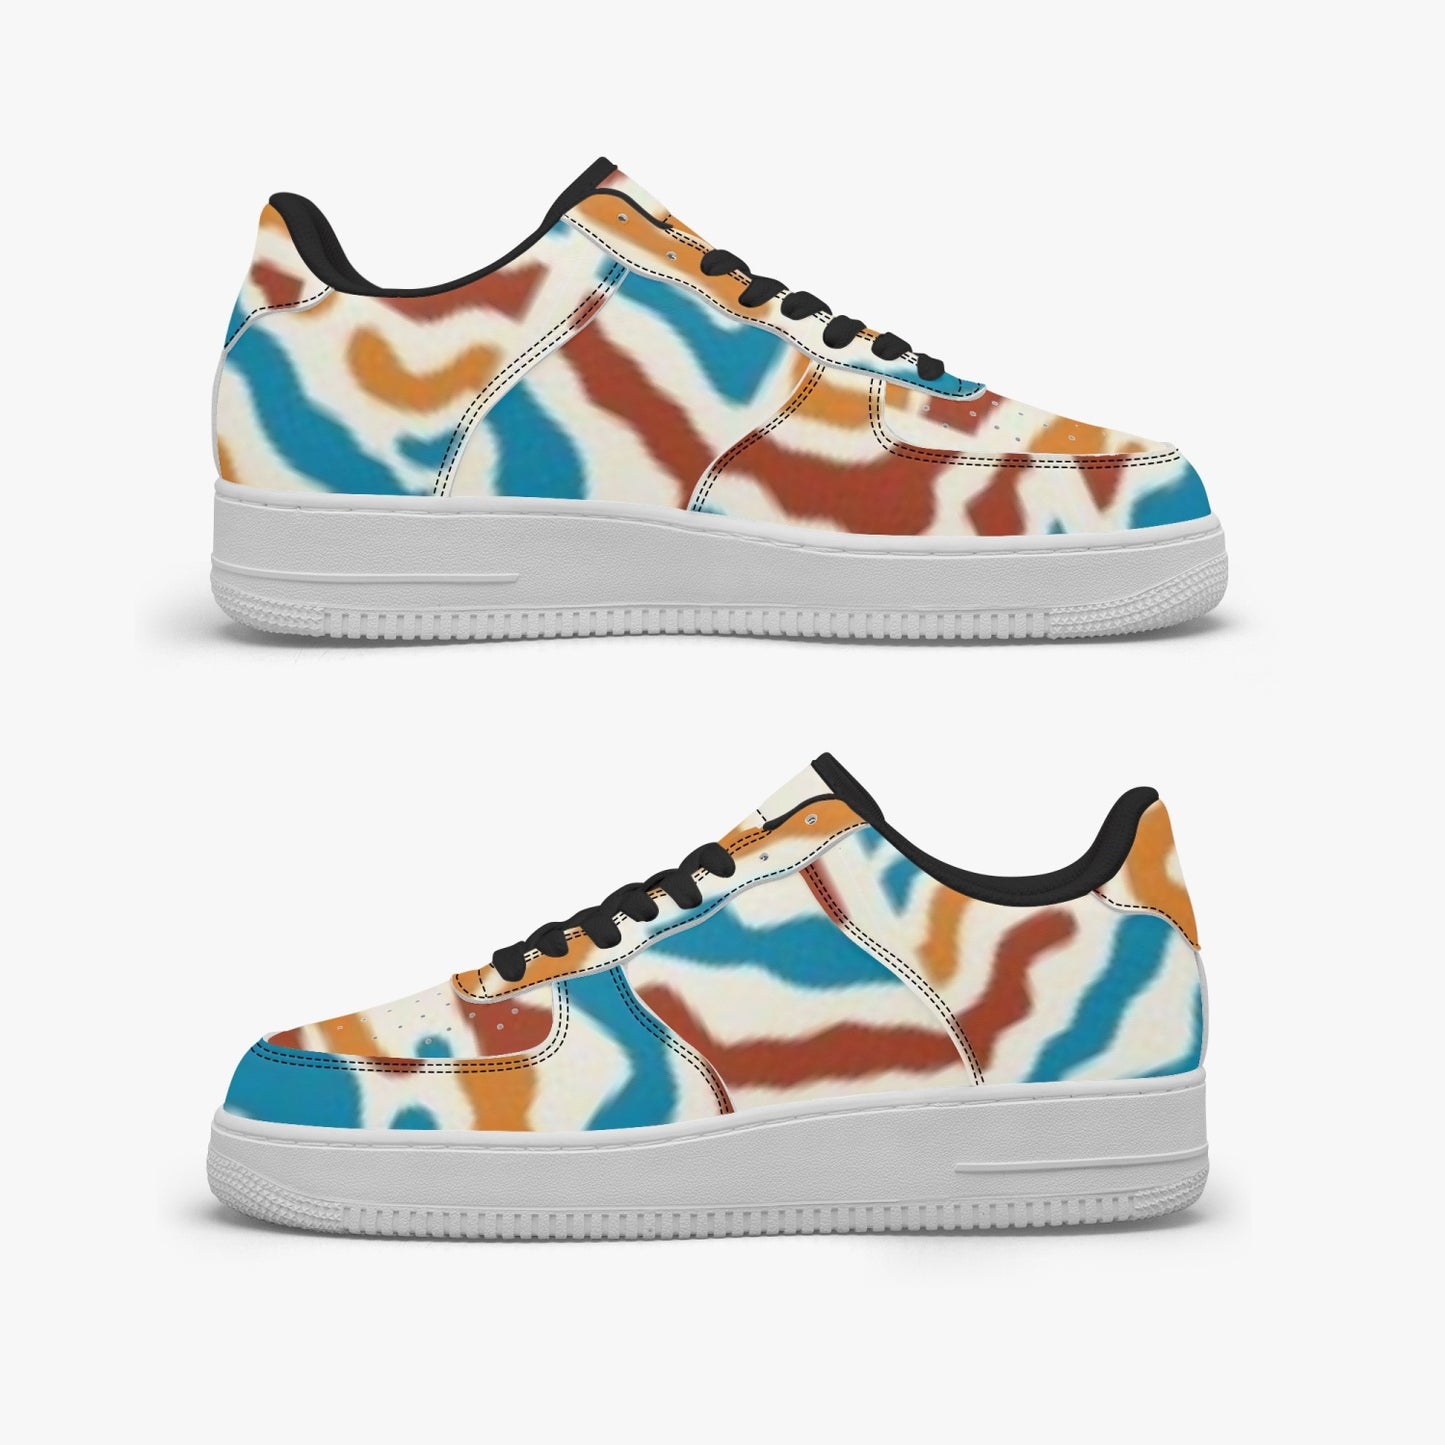 Sneakers-Crazy Pattern